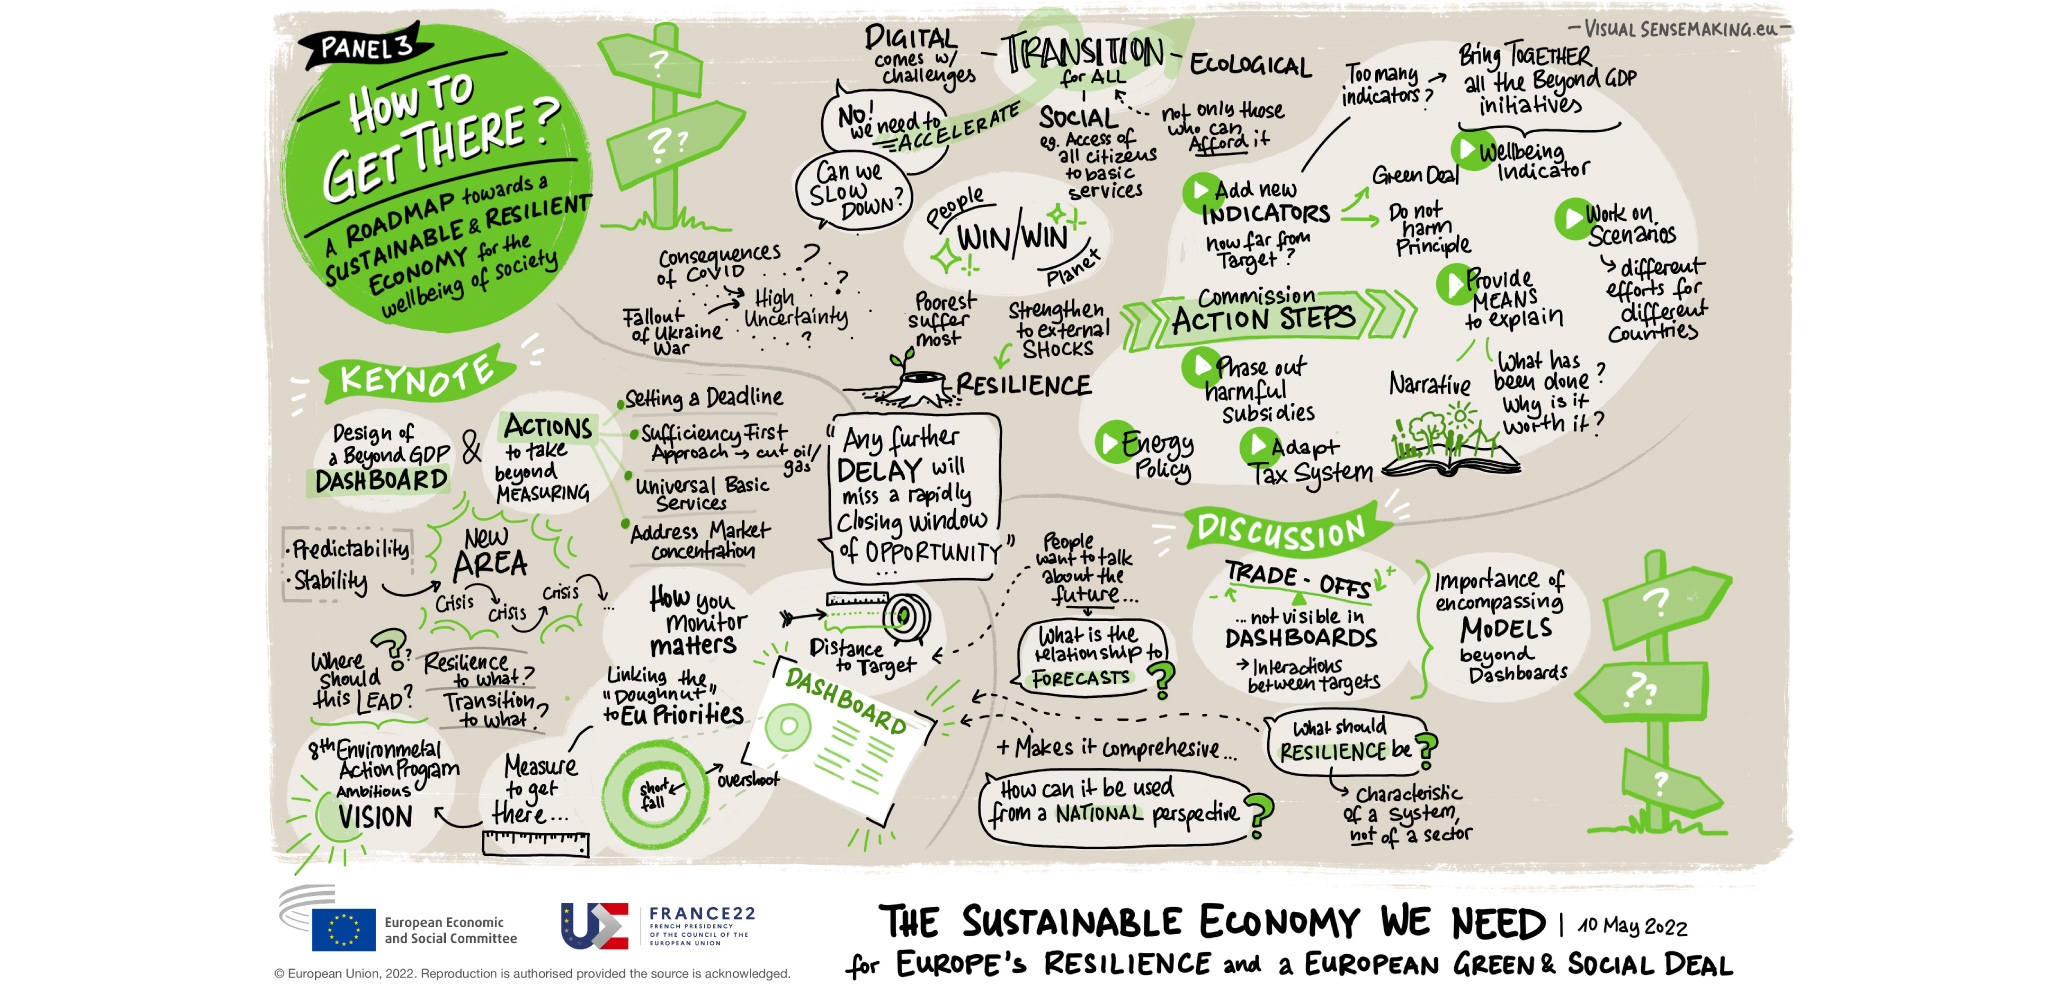 Graphic Recording of Panel 3 - How to get there?